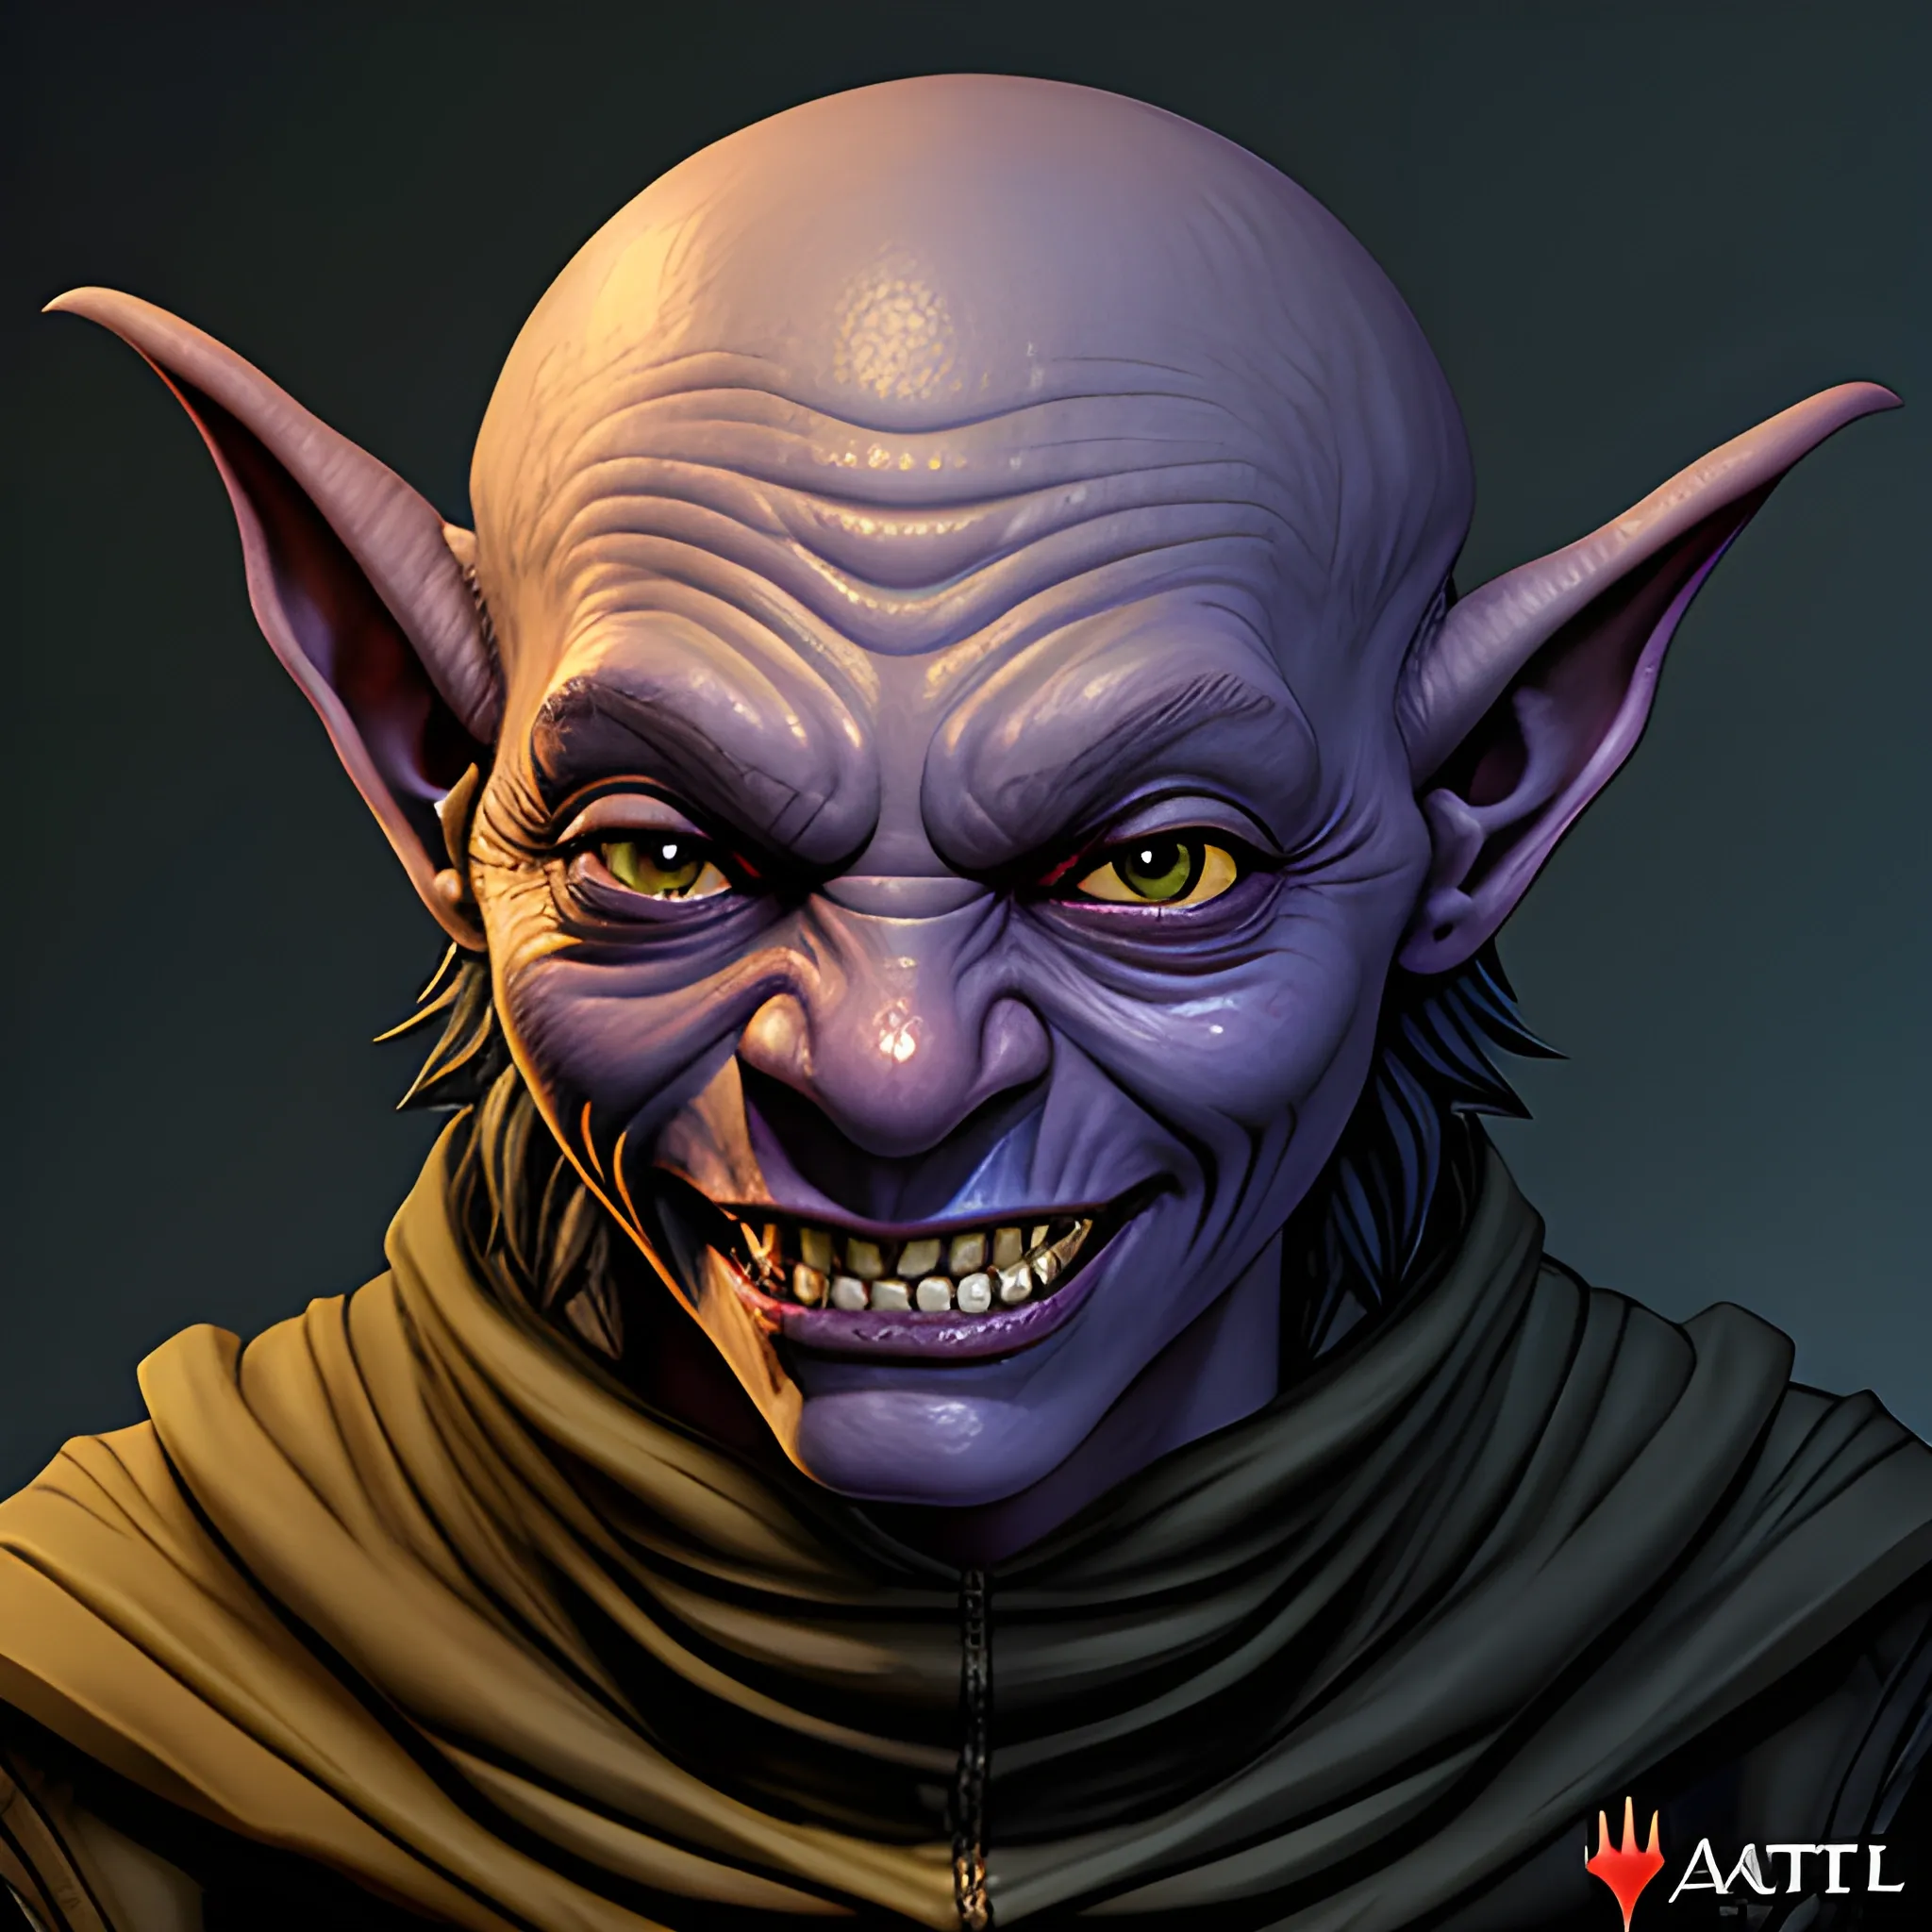 Magic the gathering art style, realistic evil goblin rogue